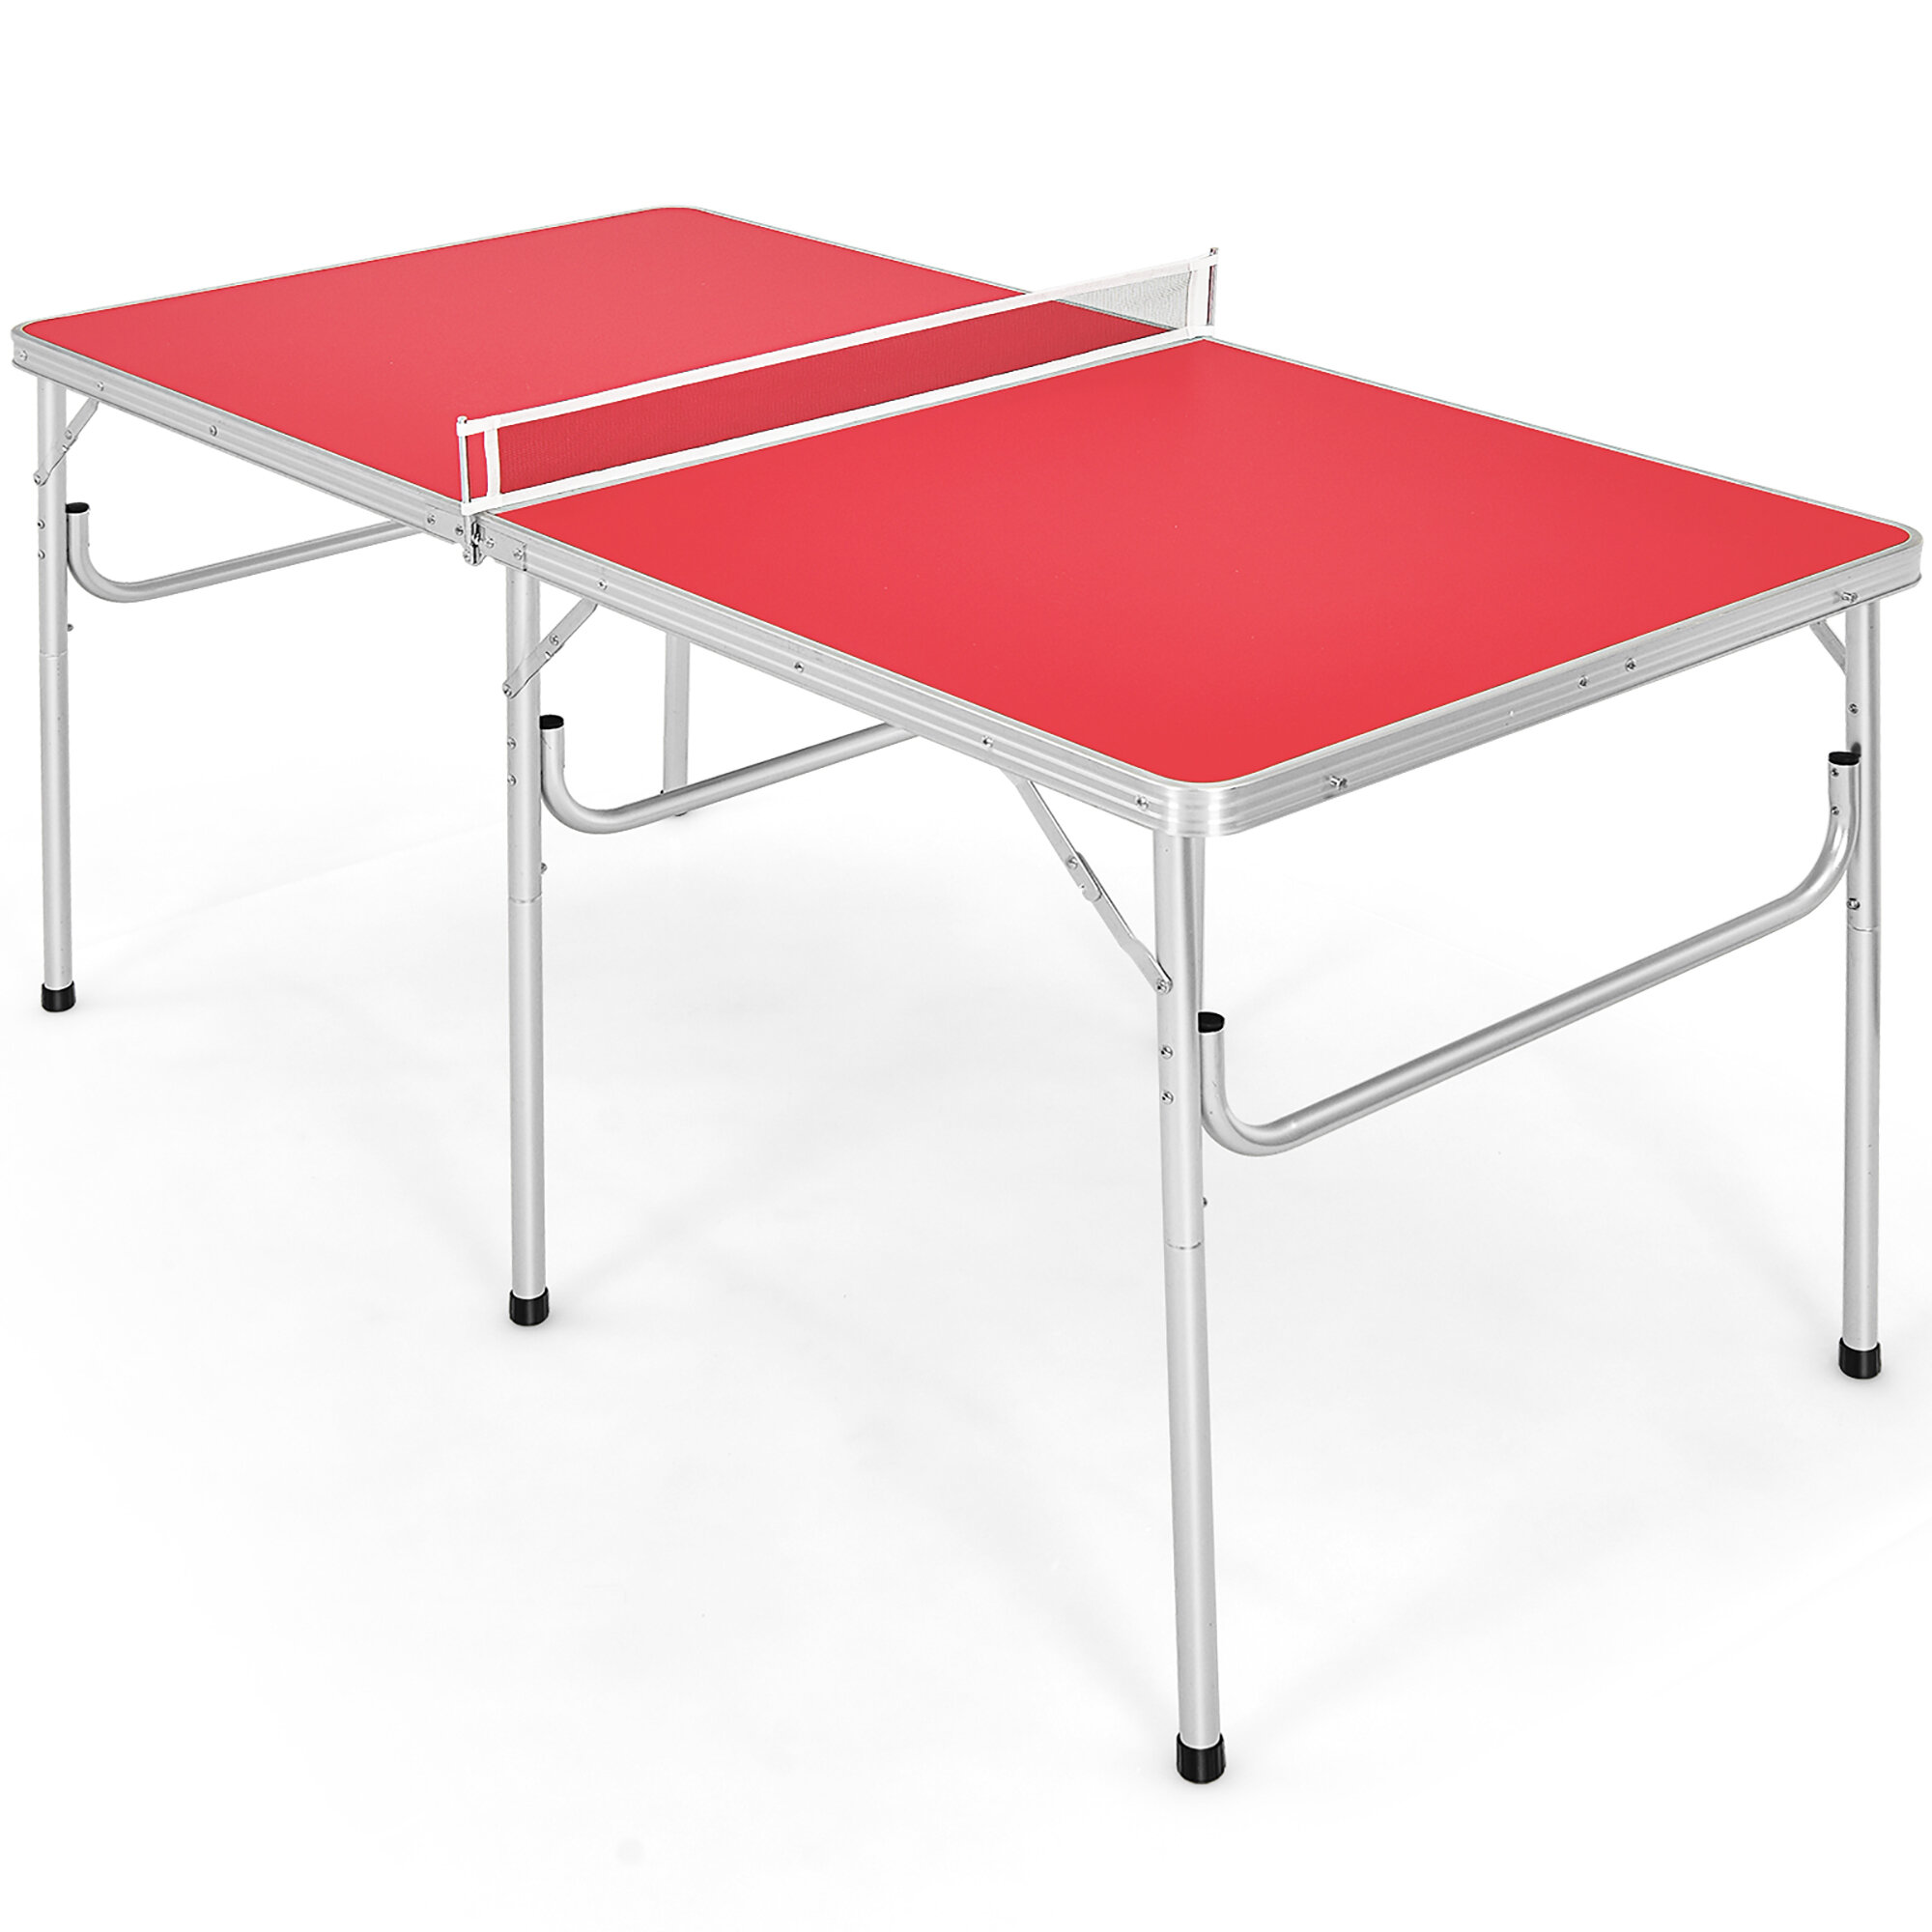 JOOLA Quadri Indoor 15mm Table Tennis Table - Ping Pong Table with Quick  Clamp Ping Pong Net Set